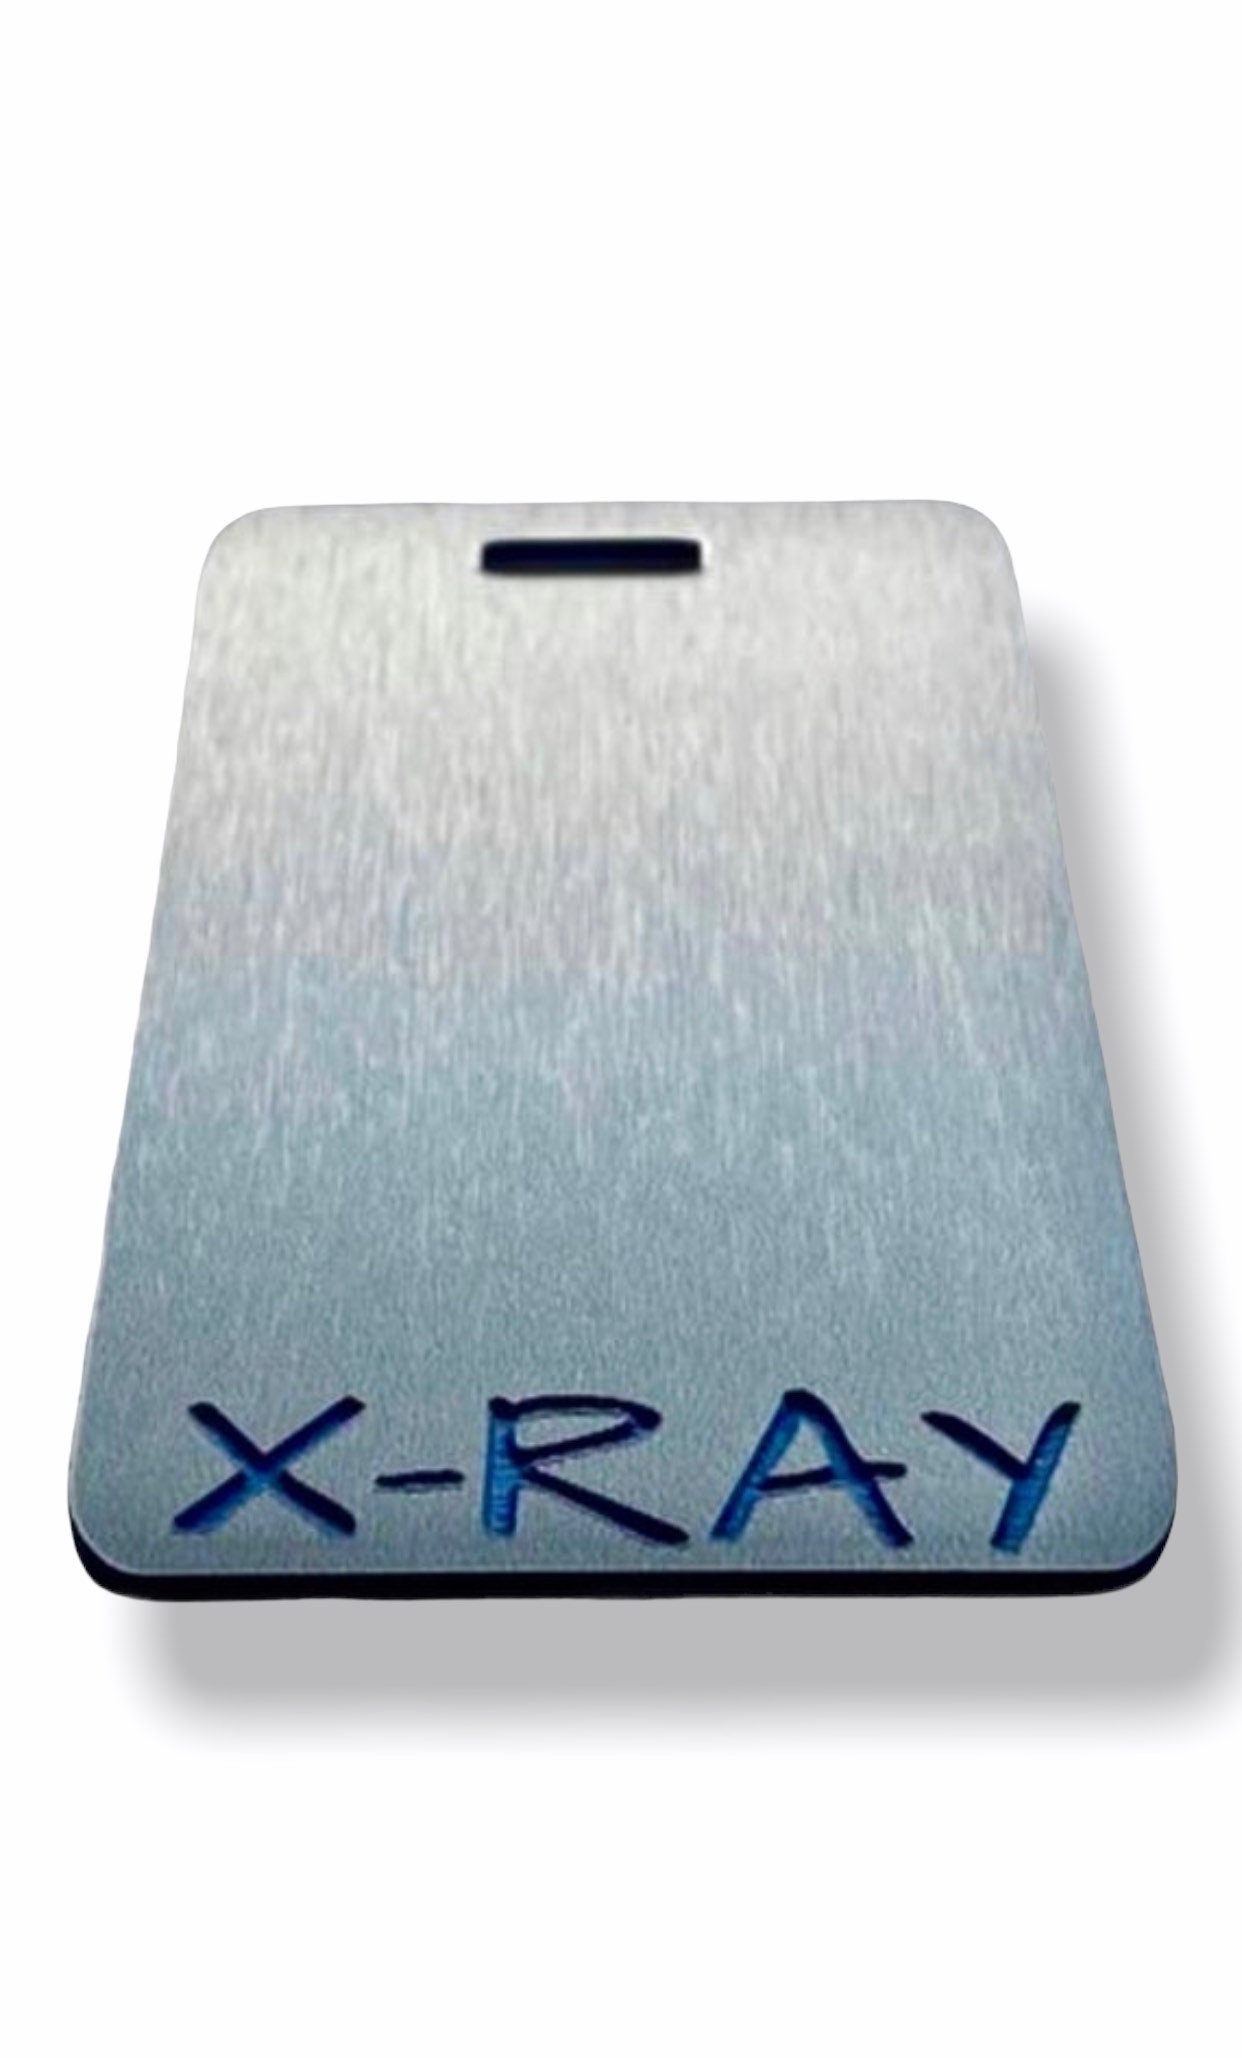 Rad Pad with Etched Wording if your choice for Holding Xray Markers